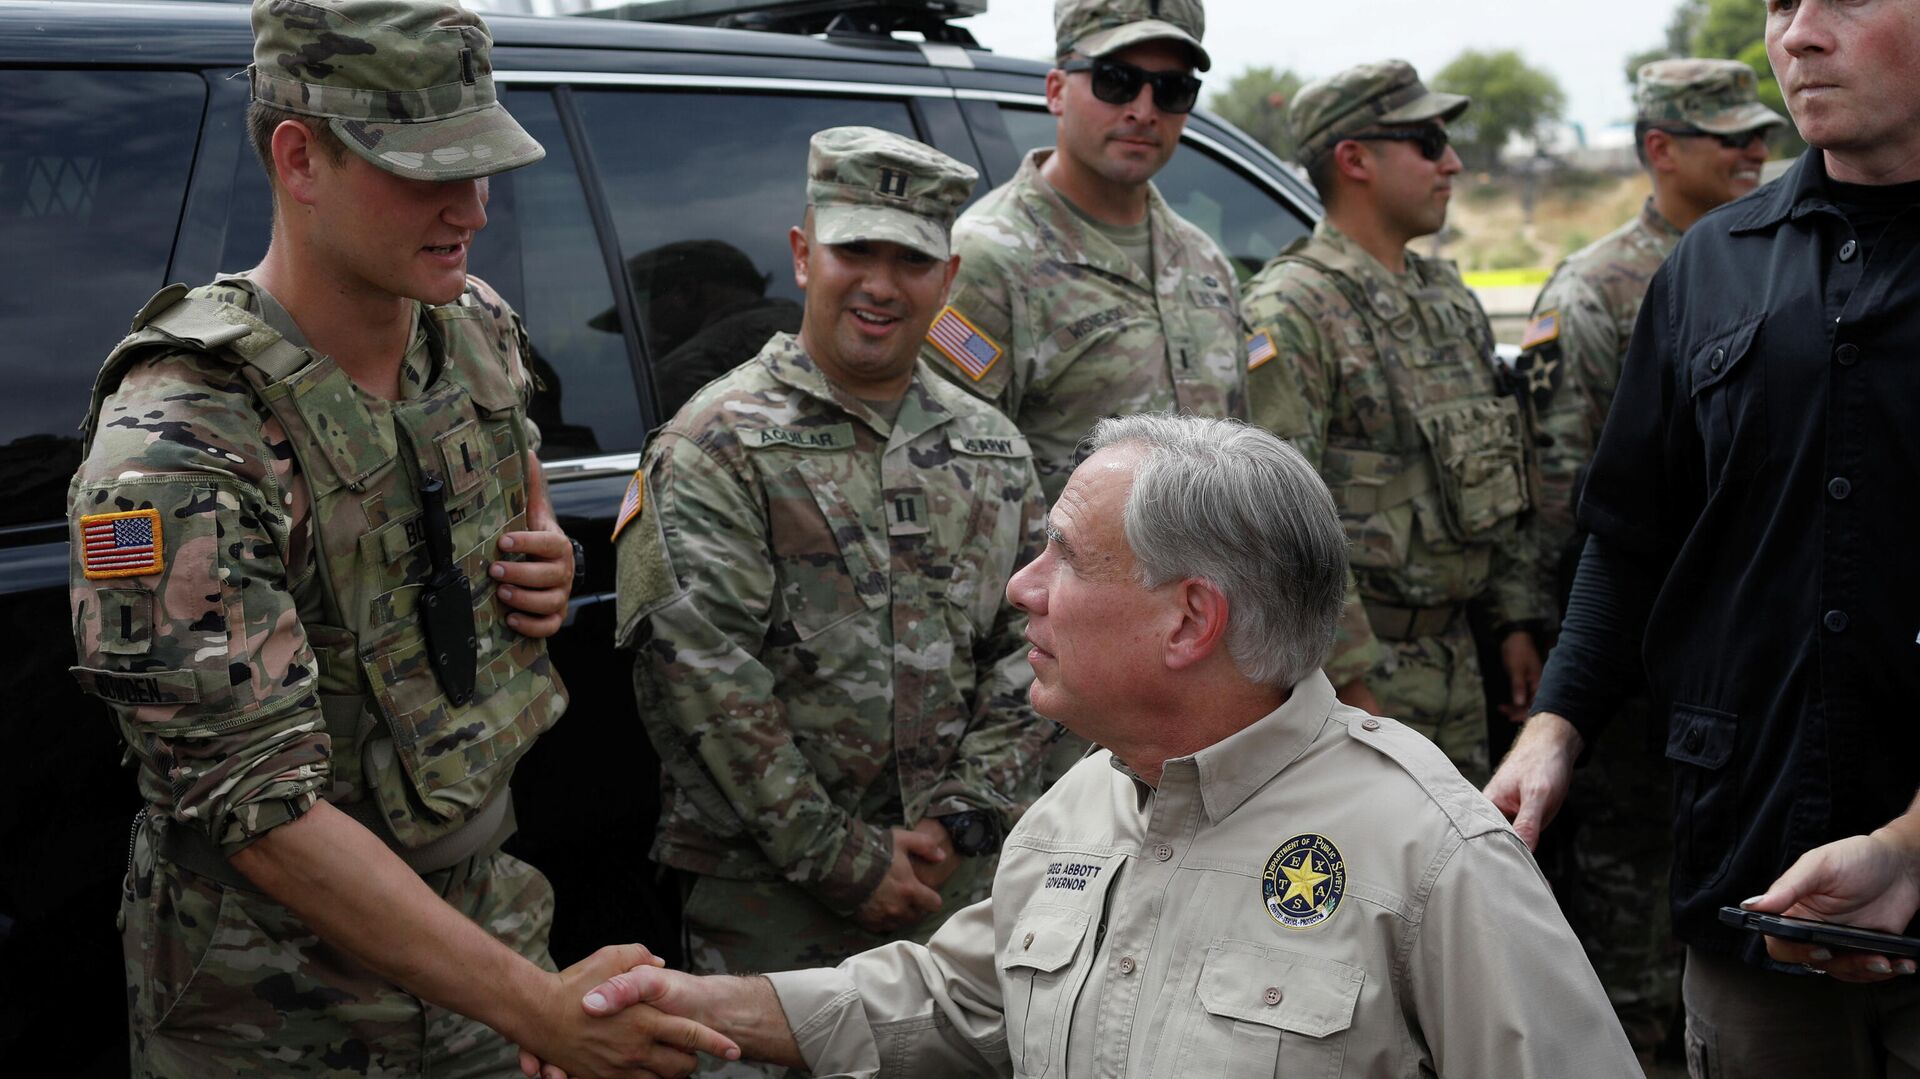 Texas Governor Gregg Abbott shakes hands with a U.S. Soldier after a news conference near the International Bridge between Mexico and the U.S., where migrants seeking asylum in the U.S. are waiting to be processed, in Del Rio, Texas, U.S., September 21, 2021 - Sputnik International, 1920, 21.09.2021